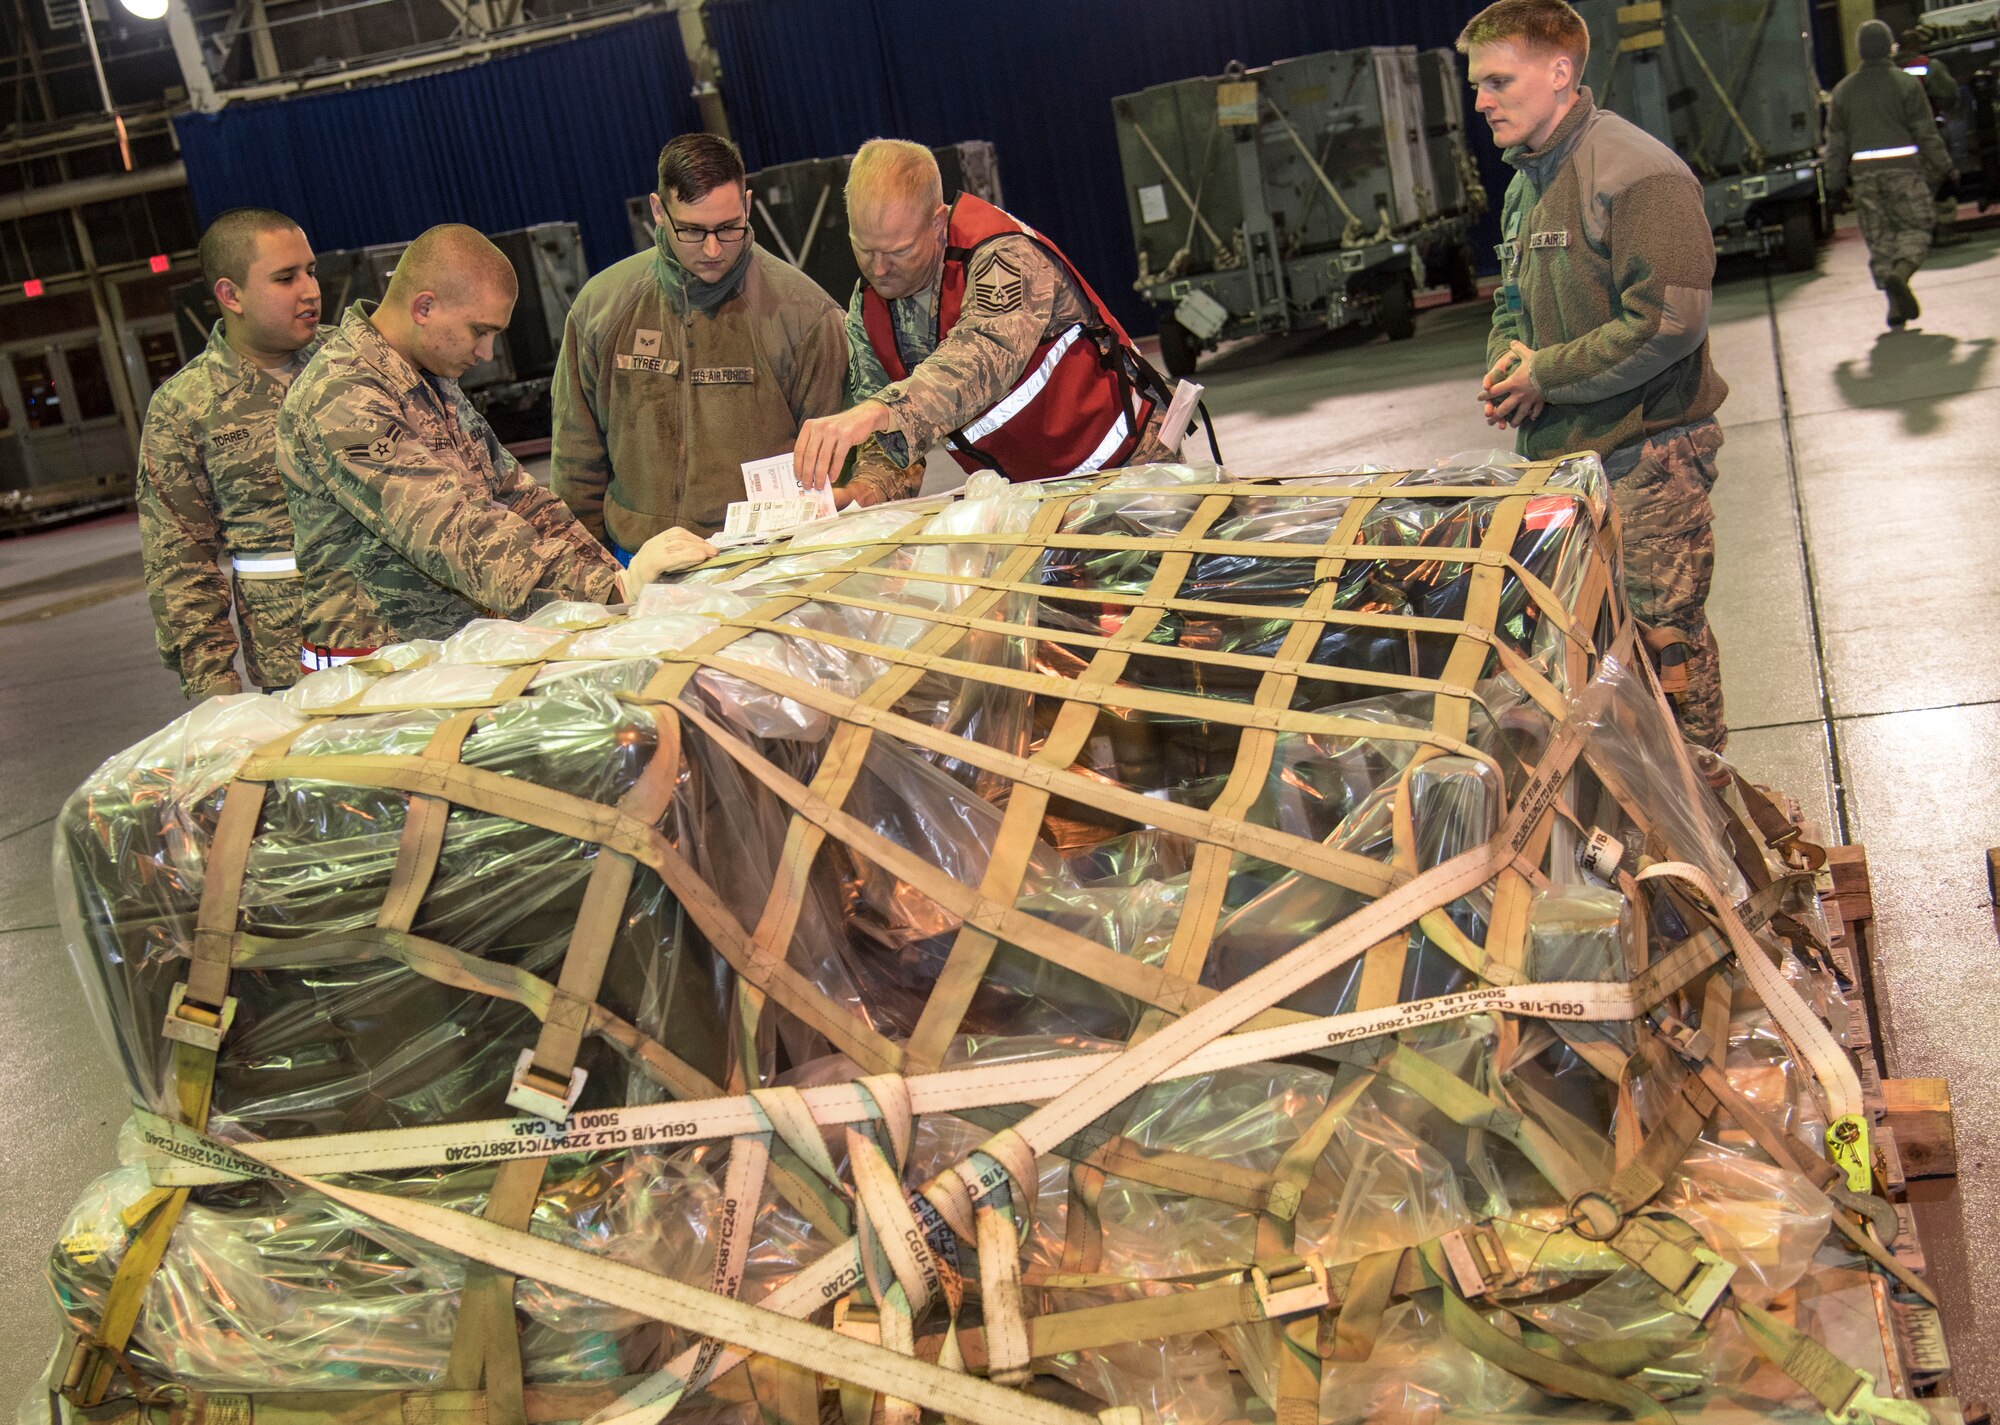 U.S. Air Force Airmen with the 35th Logistics Readiness Squadron conduct an inventory of cargo for shipment at Misawa Air Base, Japan, March 15, 2016. Inventory and inspection of cargo is essential before shipment to ensure safe travel. (U.S. Air Force photo by Airman 1st Class Jordyn Fetter)